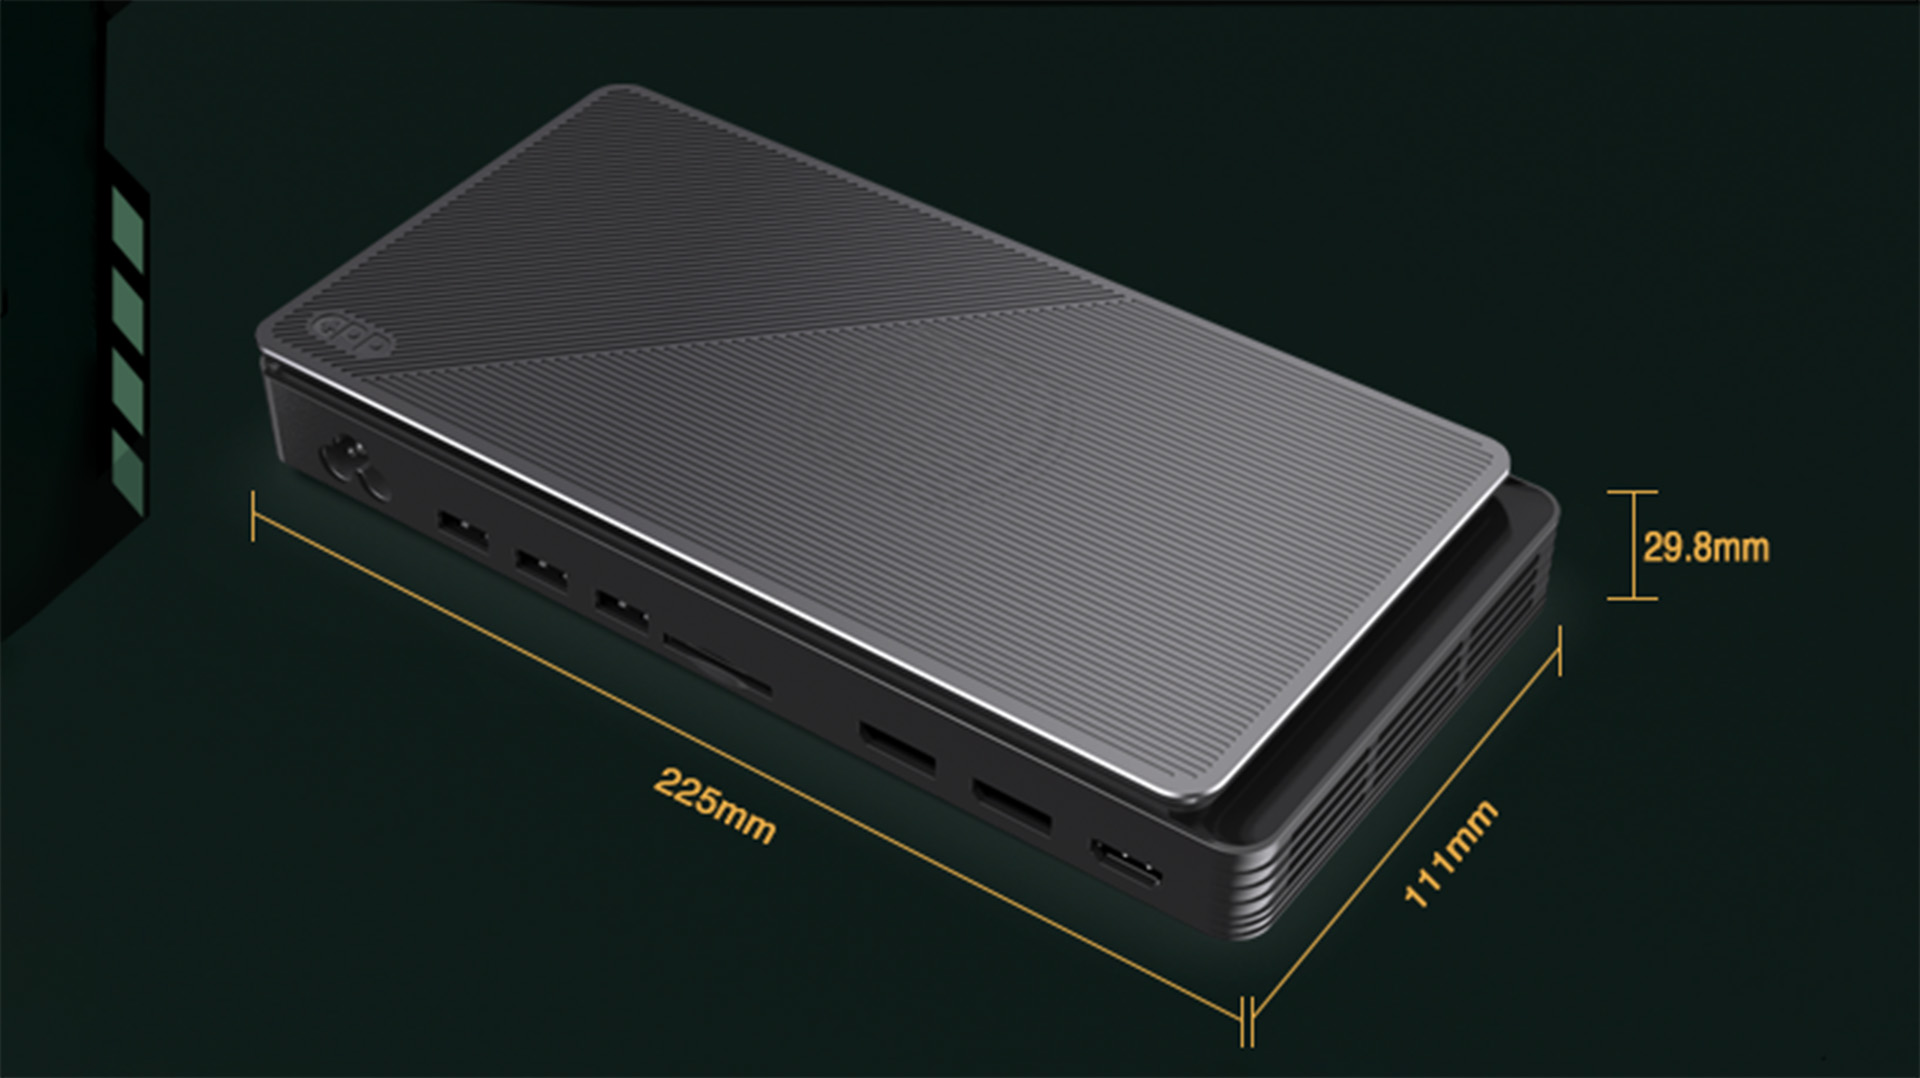 The 'world's smallest' external GPU would make for a super portable laptop  power-up alongside a pair of generous cargo shorts